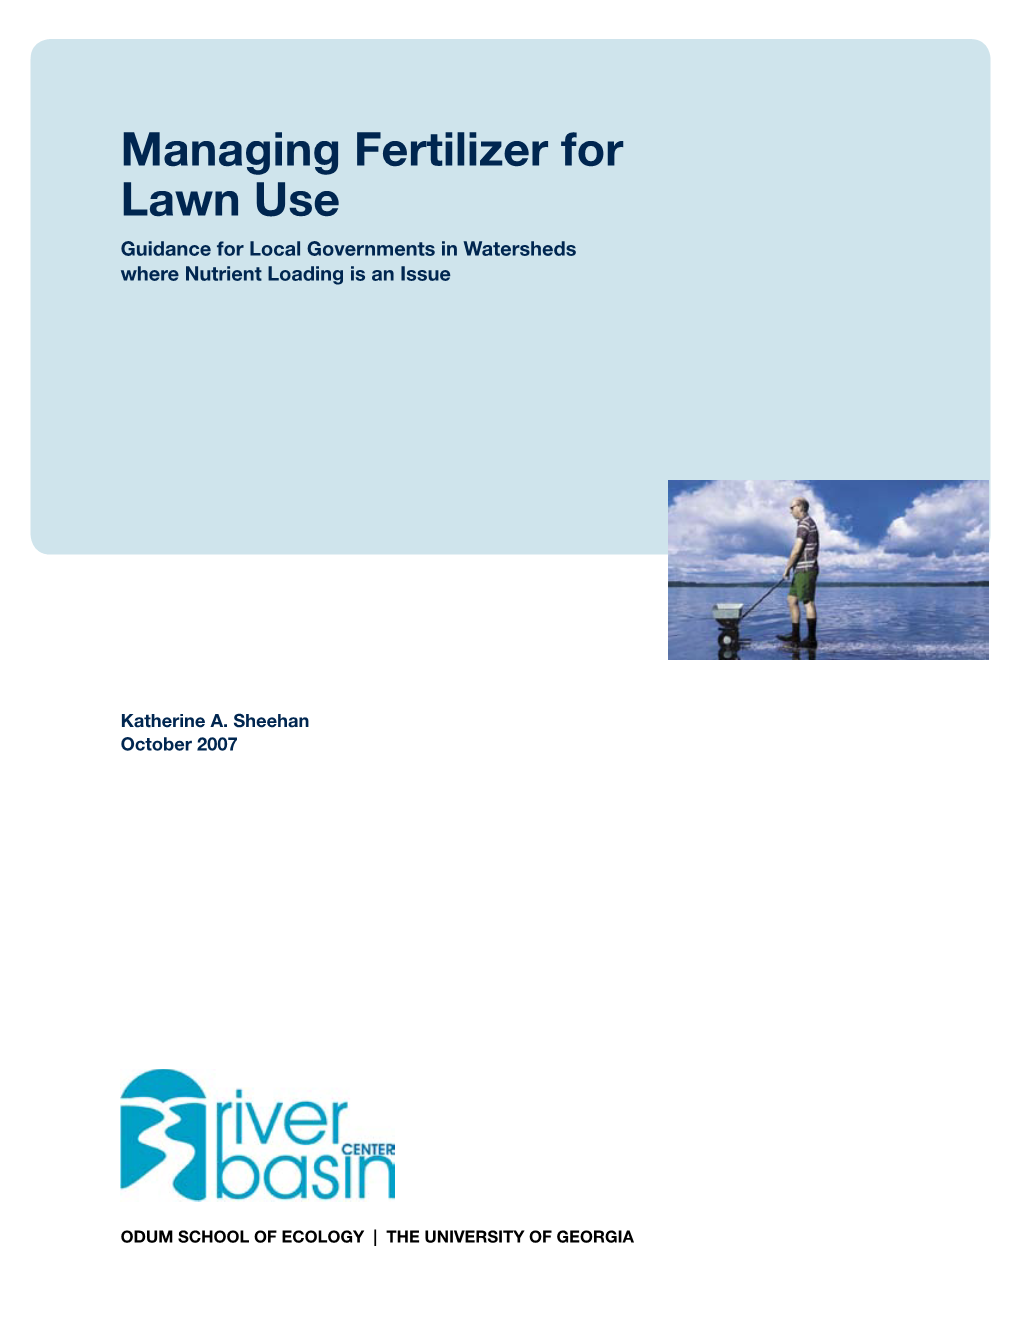 Managing Fertilizer for Lawn Use Guidance for Local Governments in Watersheds Where Nutrient Loading Is an Issue